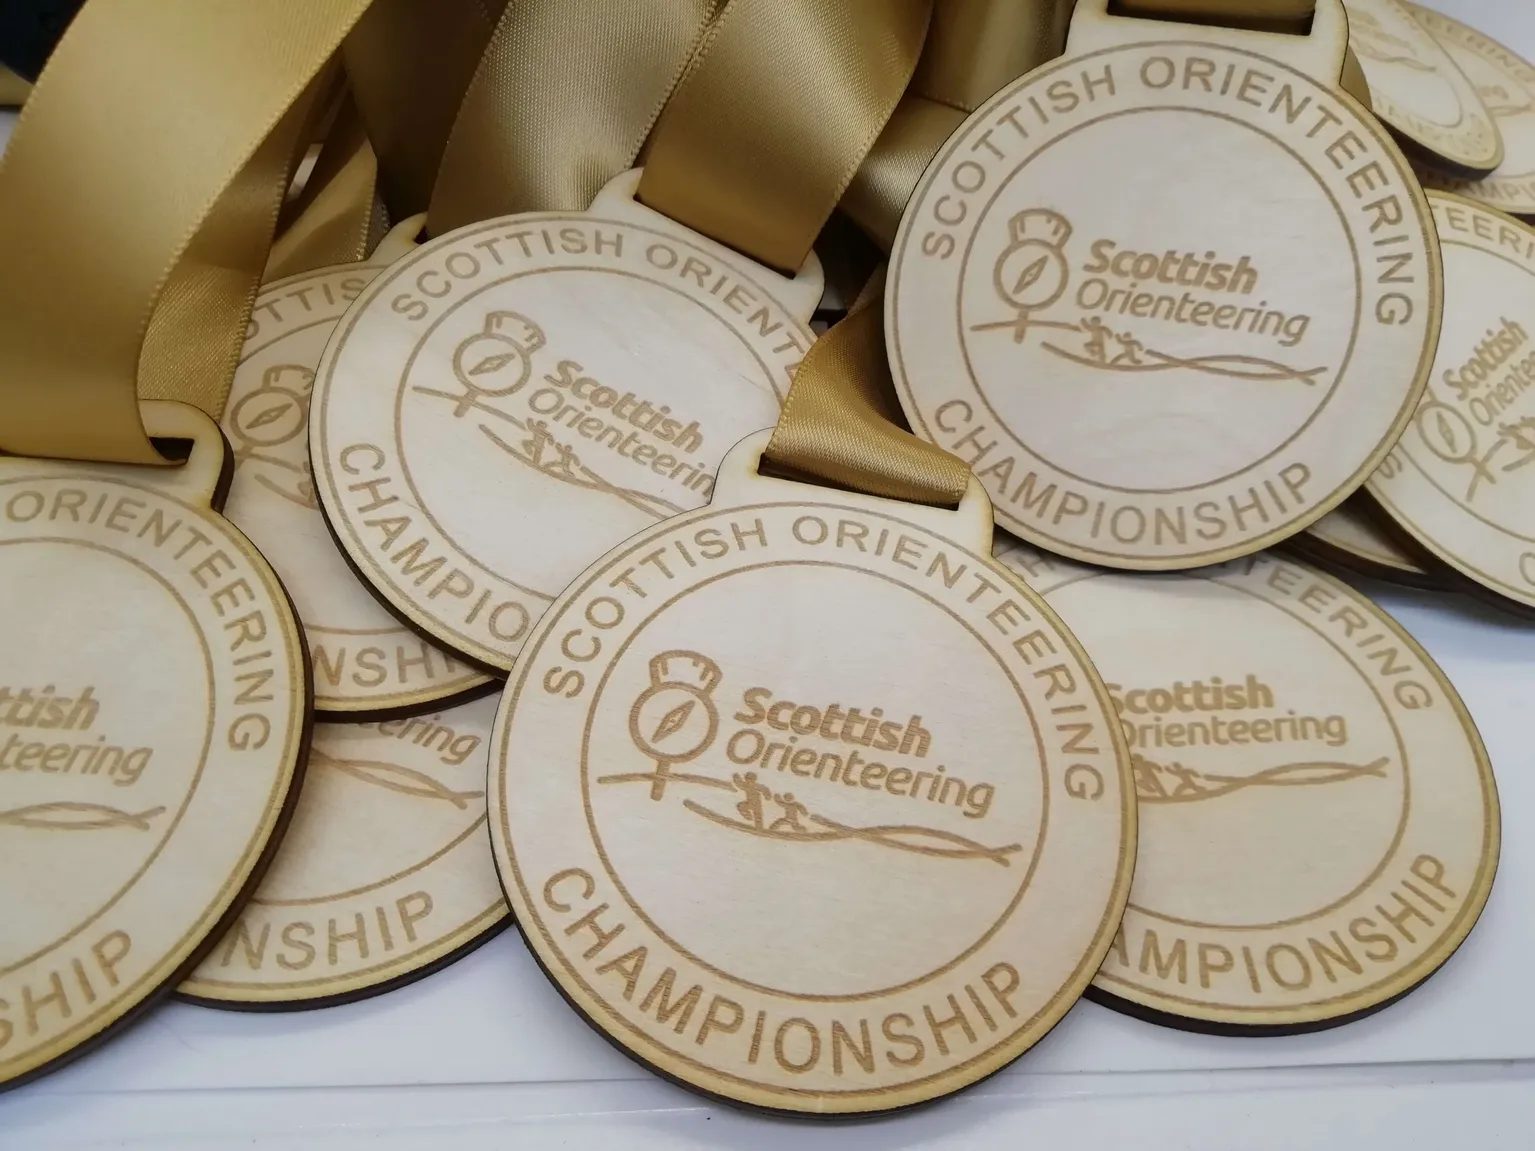 Customised medals for the Scottish Olympics.